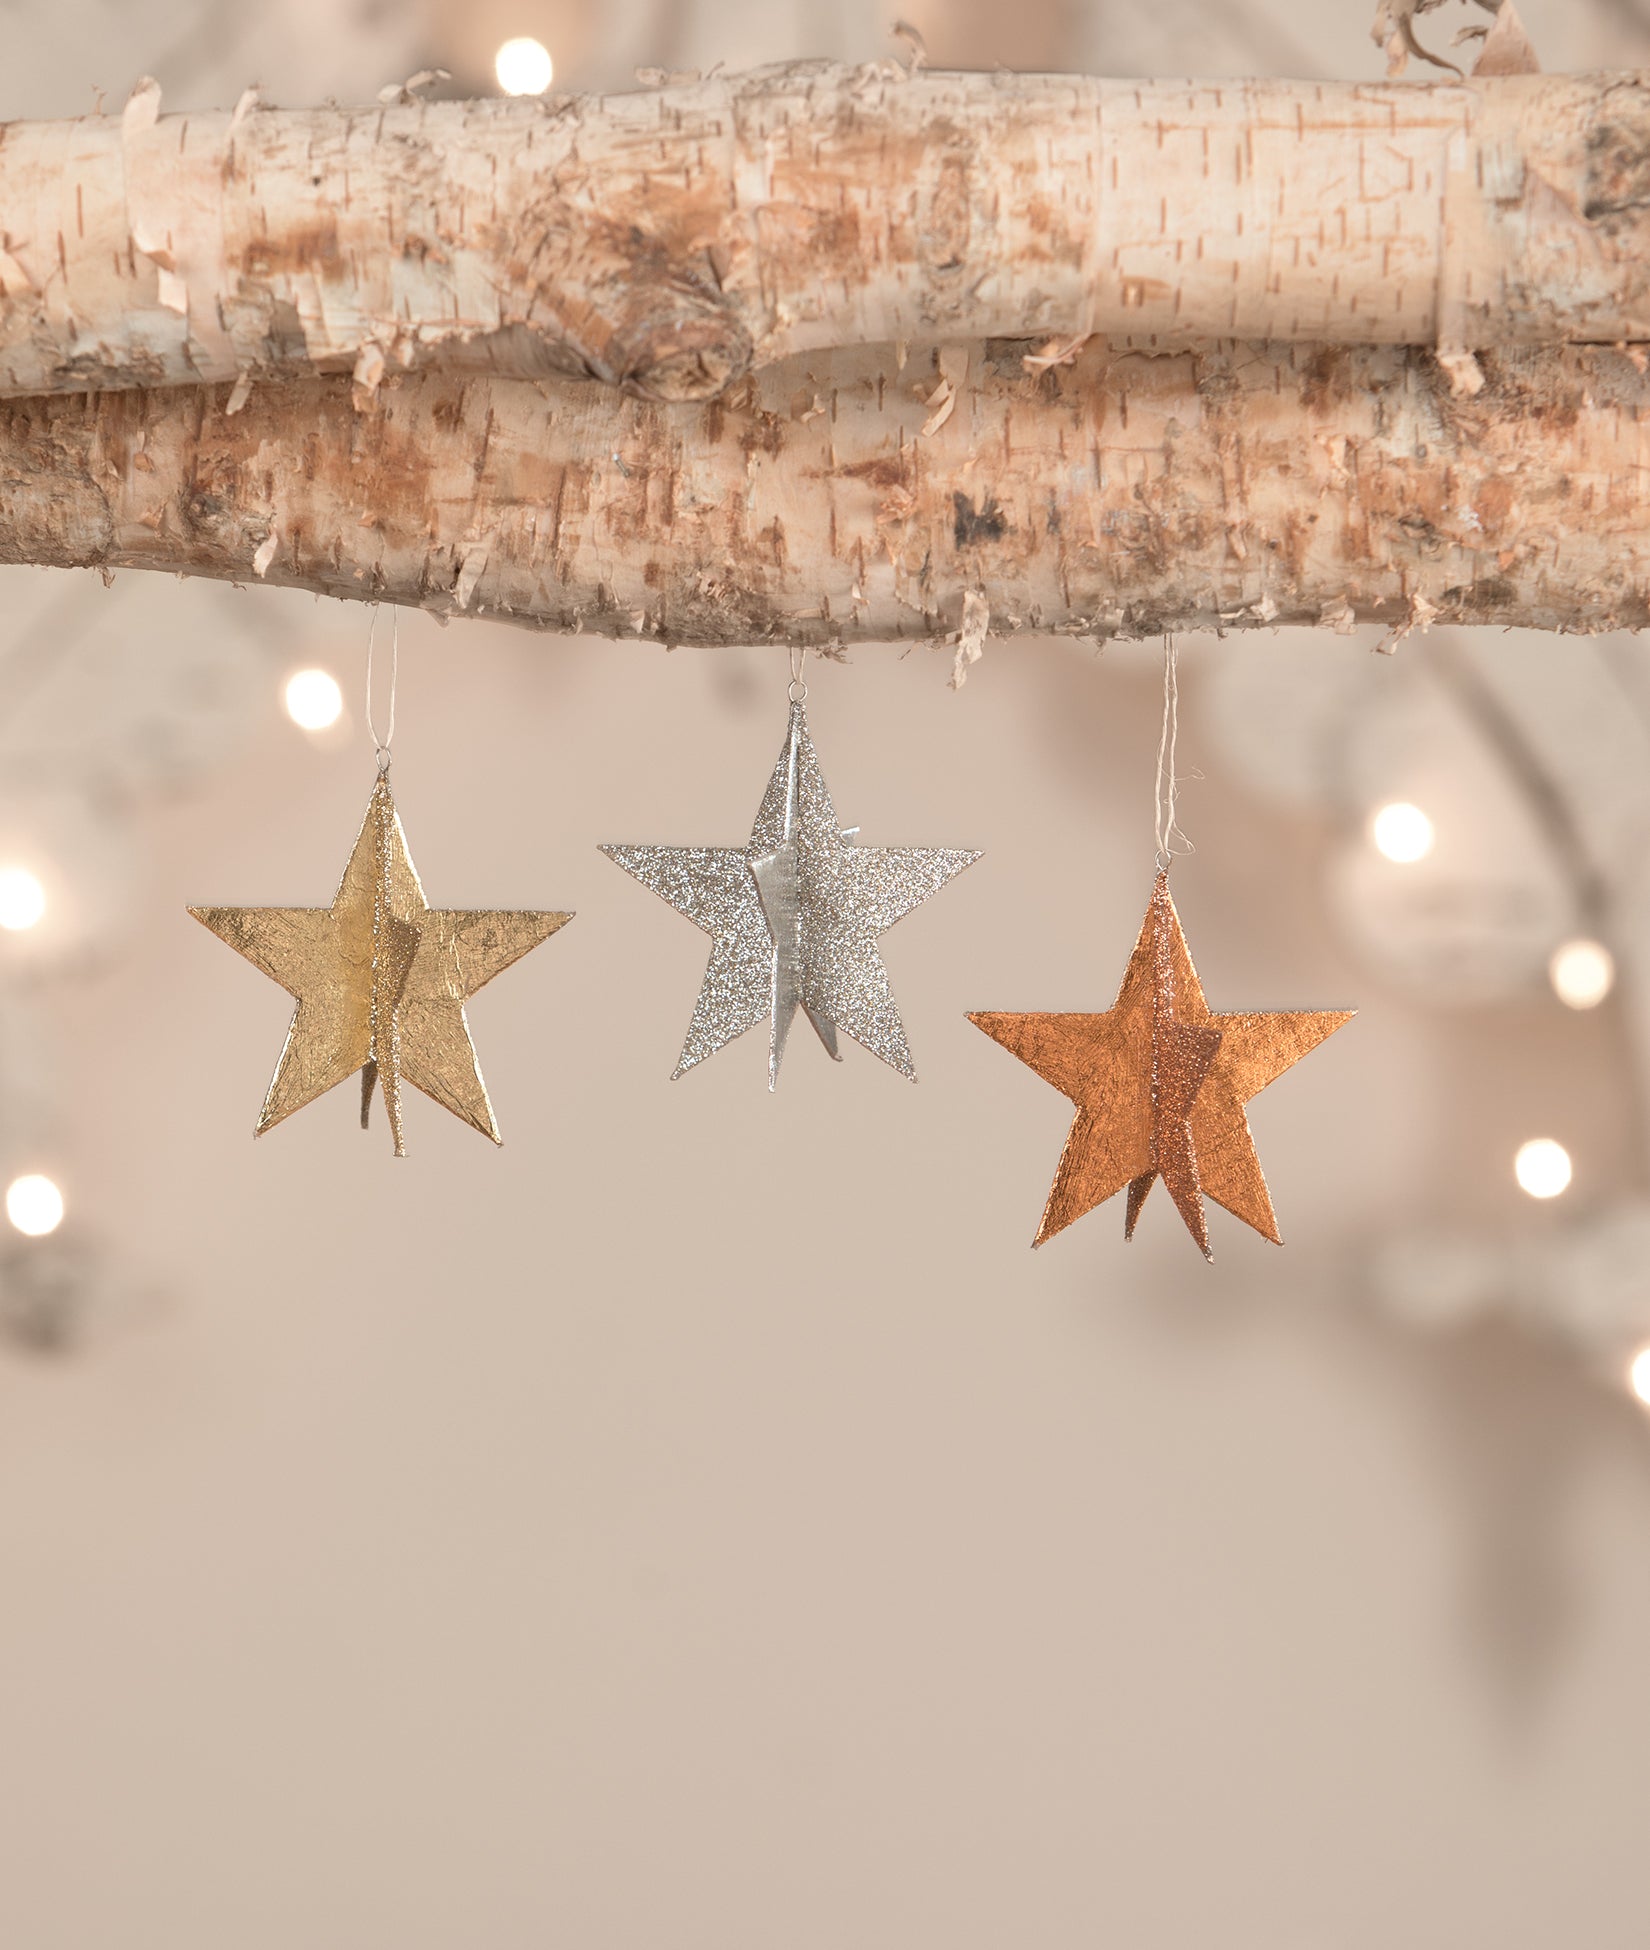 Metallic Star Ornaments in gold, silver, and copper